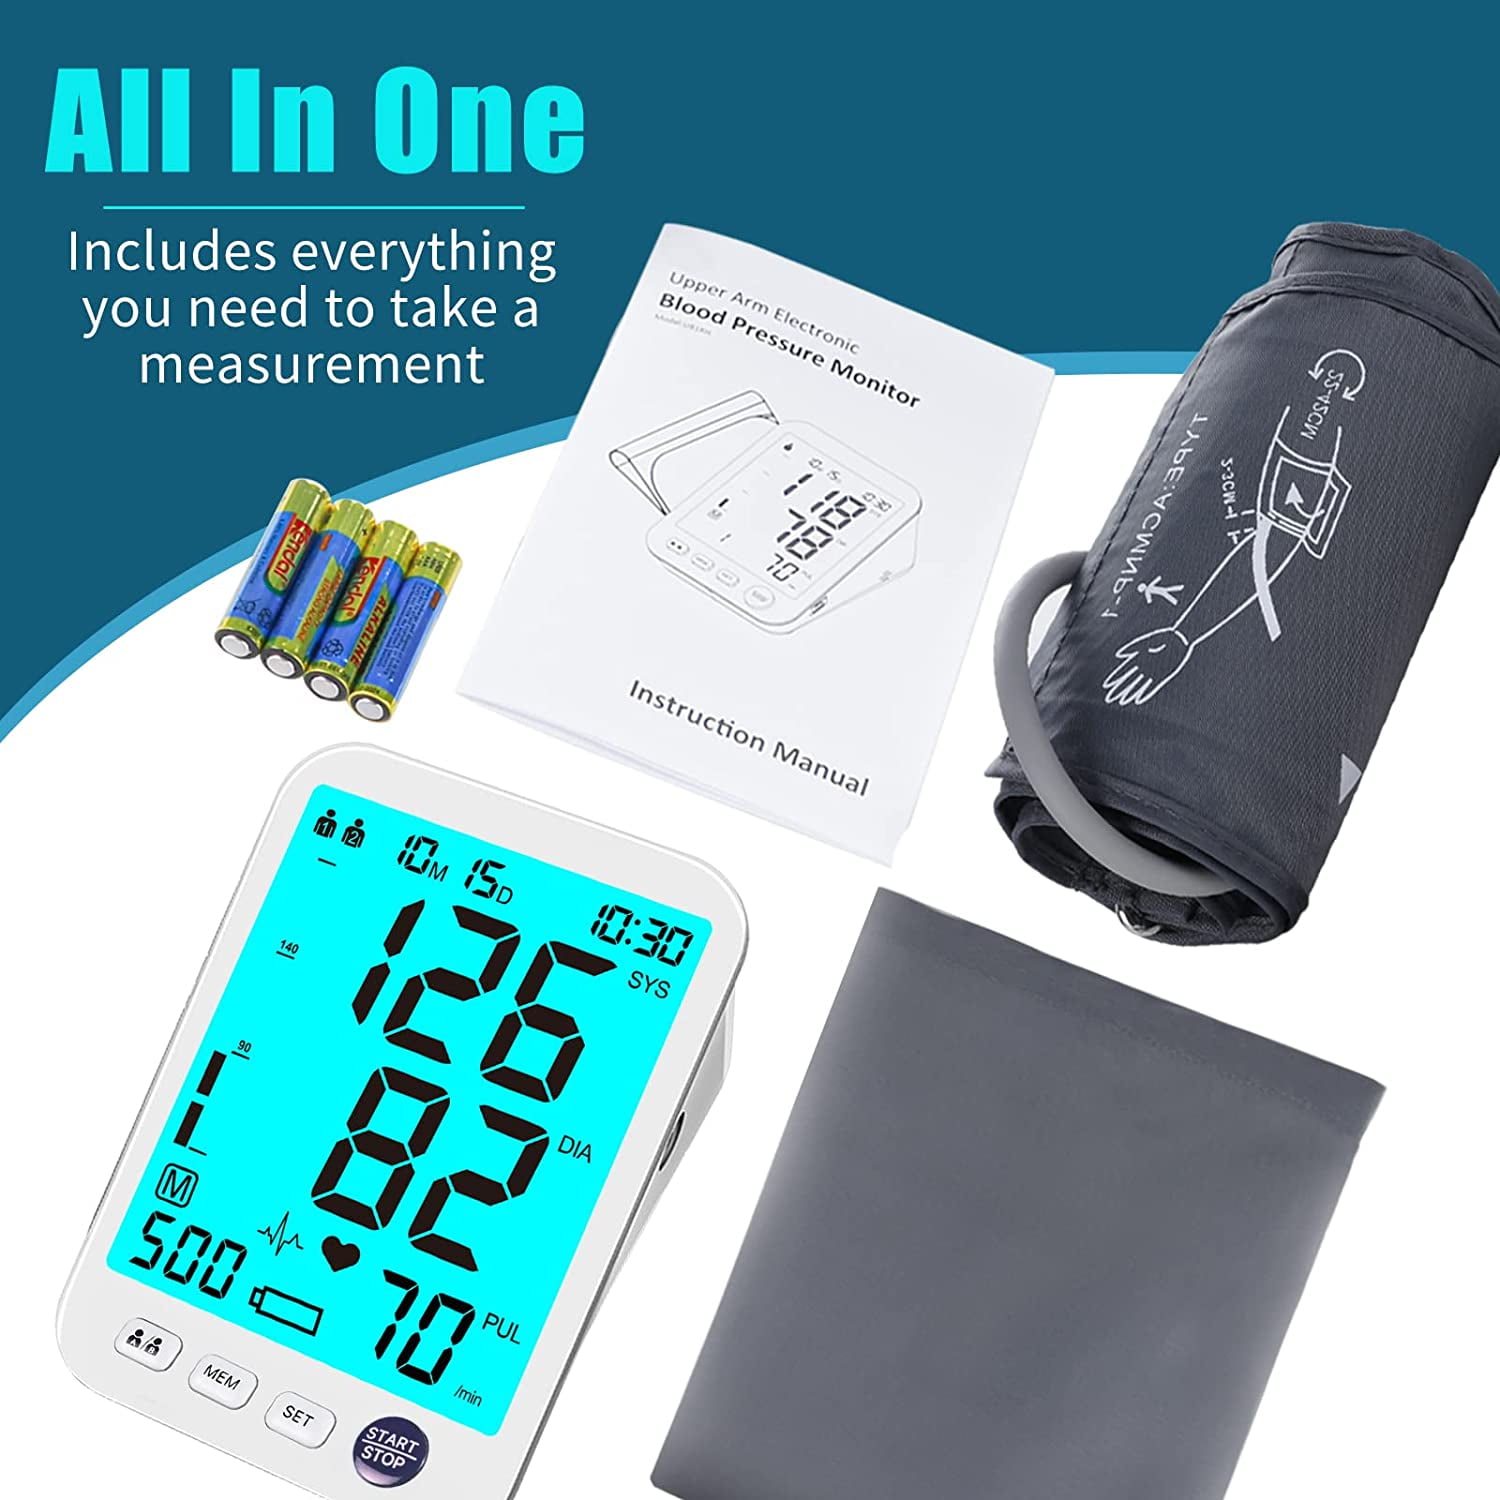 A&D Medical Premium Pre-Formed Cuff Upper Arm Blood Pressure Machine  (9-17/23-43 cm Range) Home BP Monitor, One Click Operation w/Easy to Read